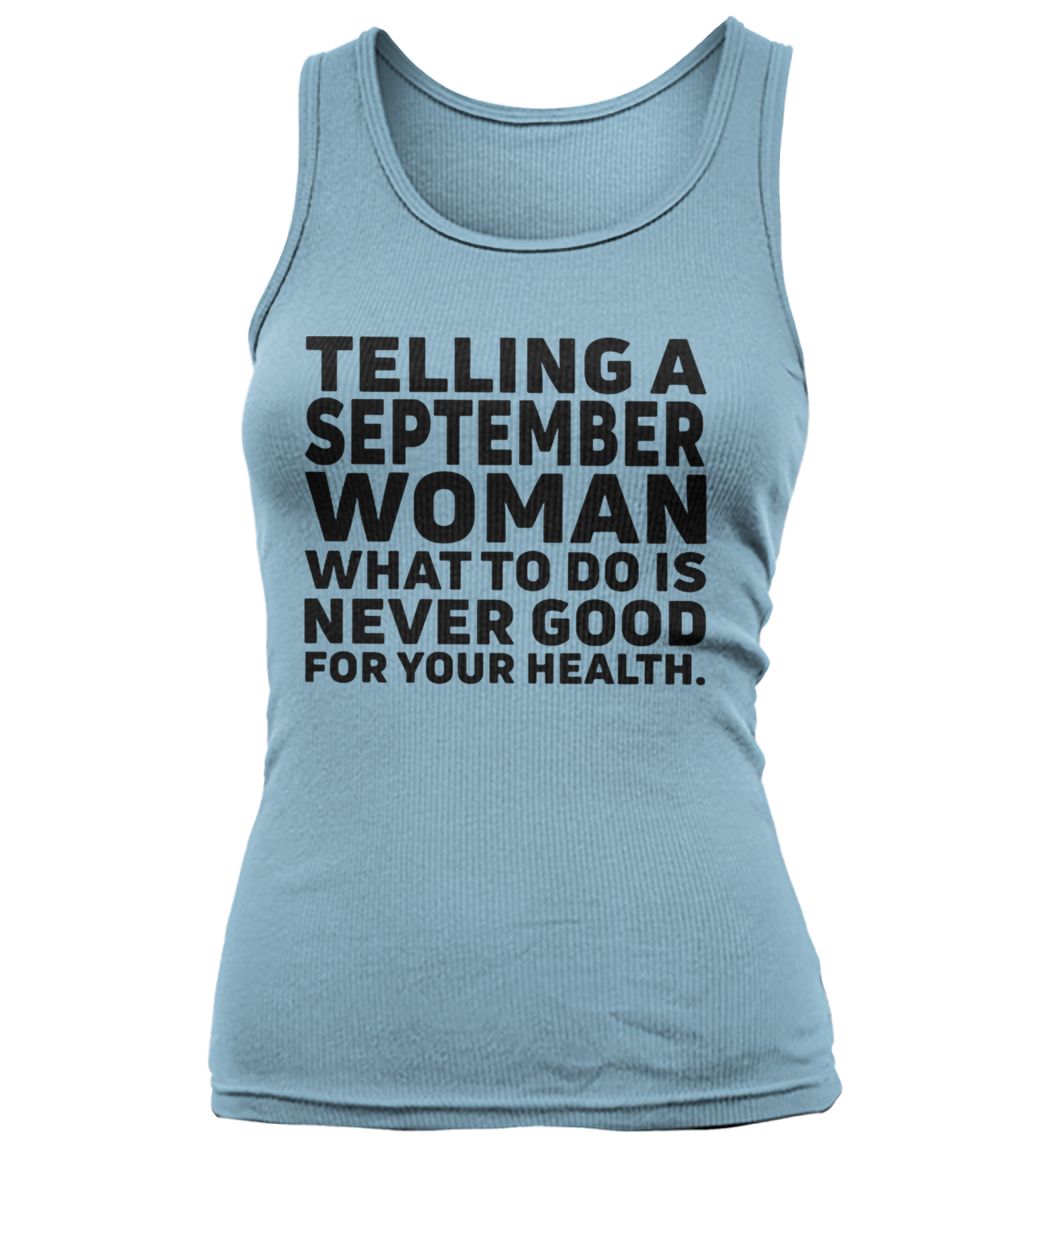 Telling a september woman what to do is never good for your health women's tank top